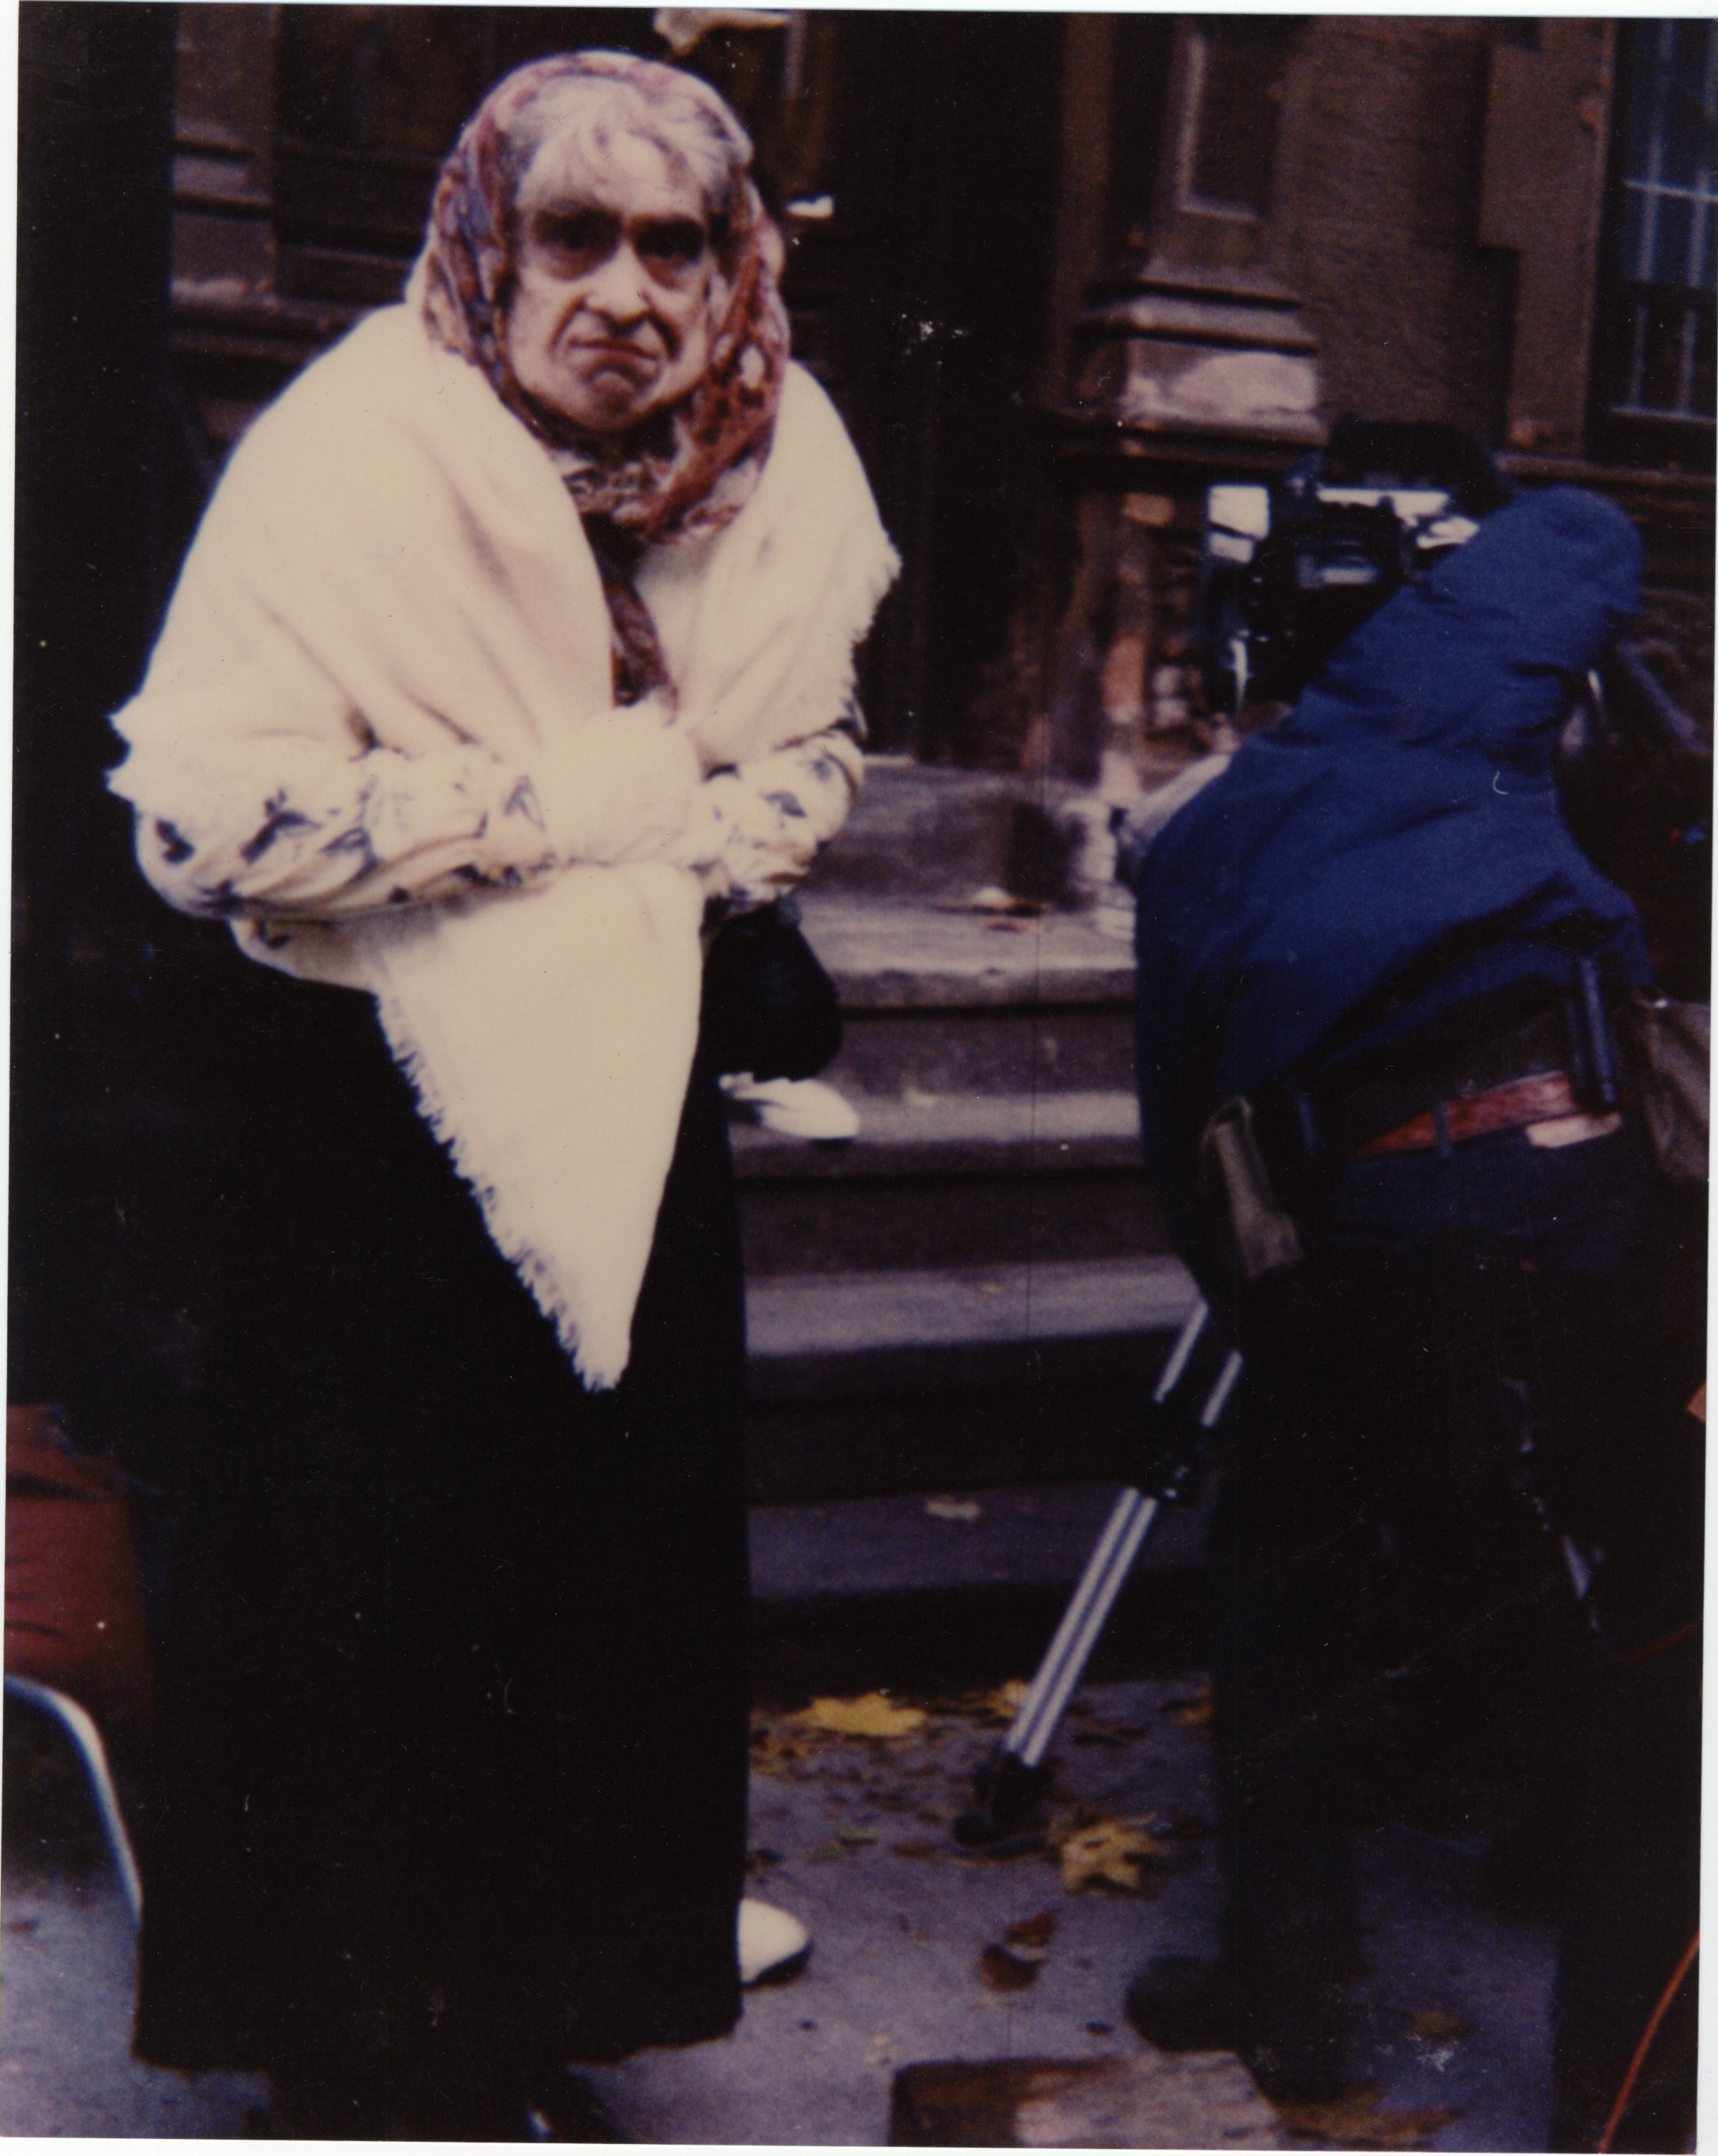 David Copeland as an old lady who falls down a flight of stairs in 'Joe's Apartment'.